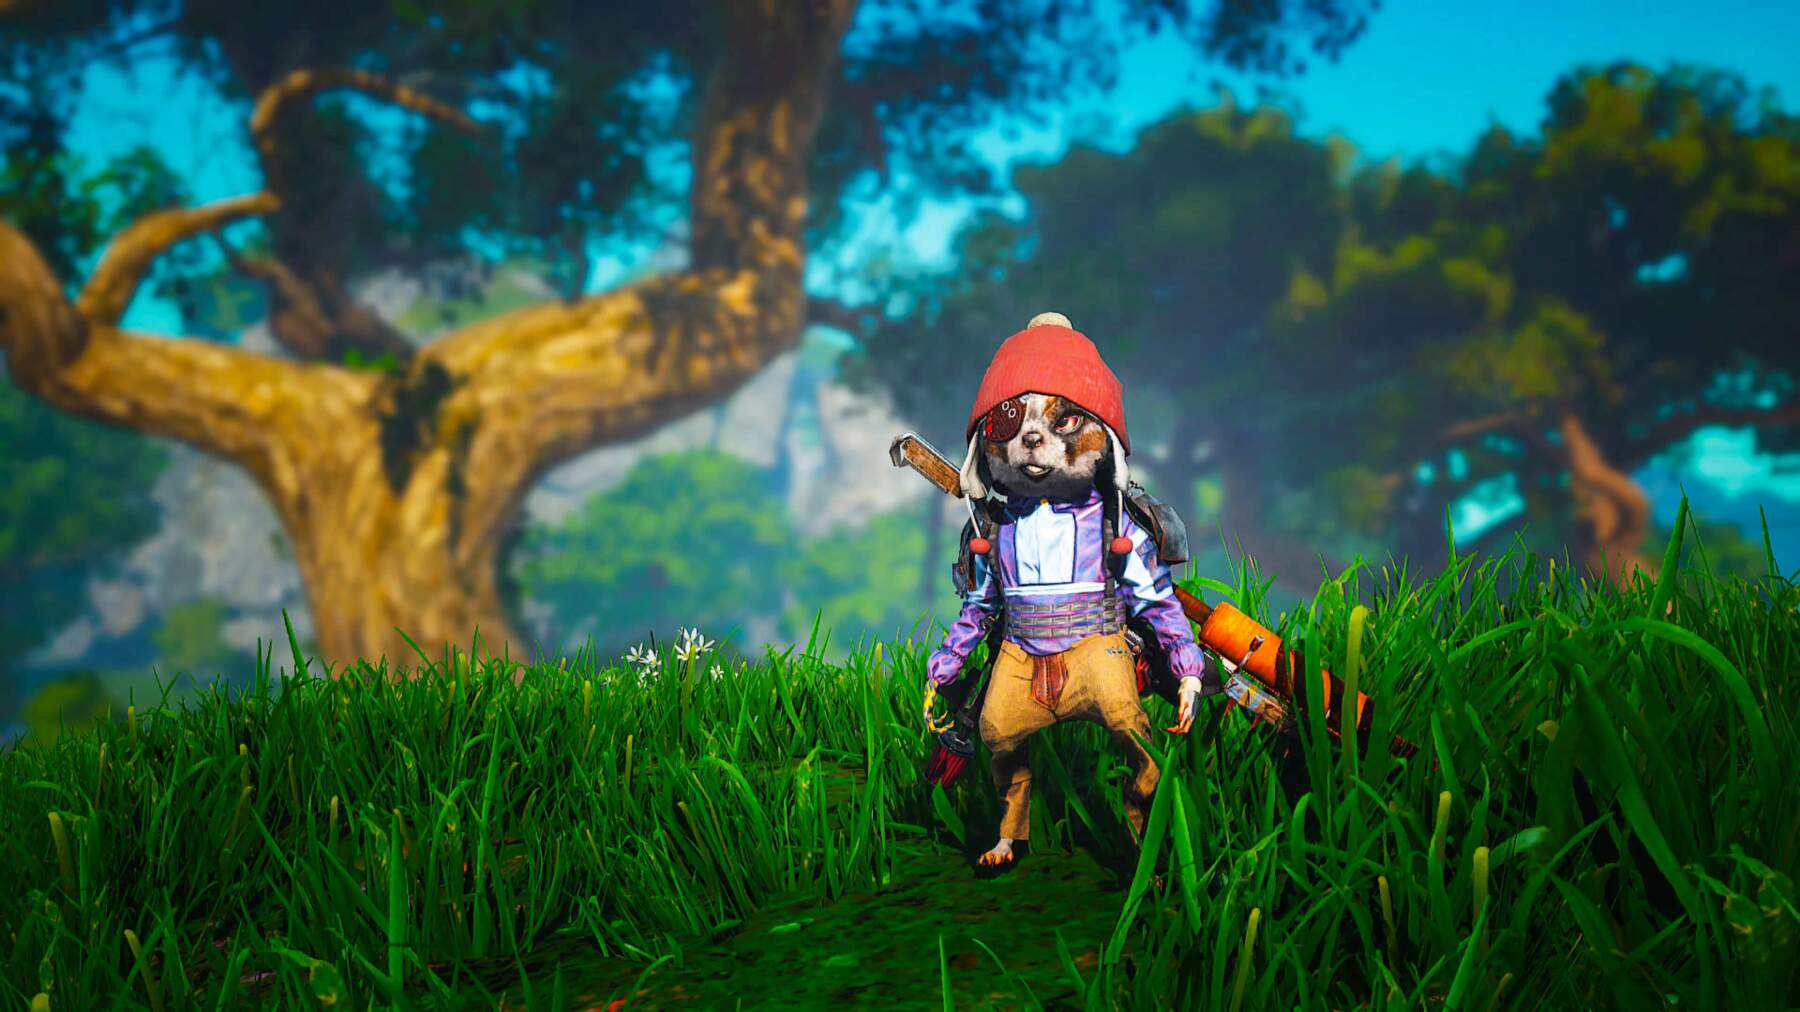 It's me. Well, my character, in "Biomutant"